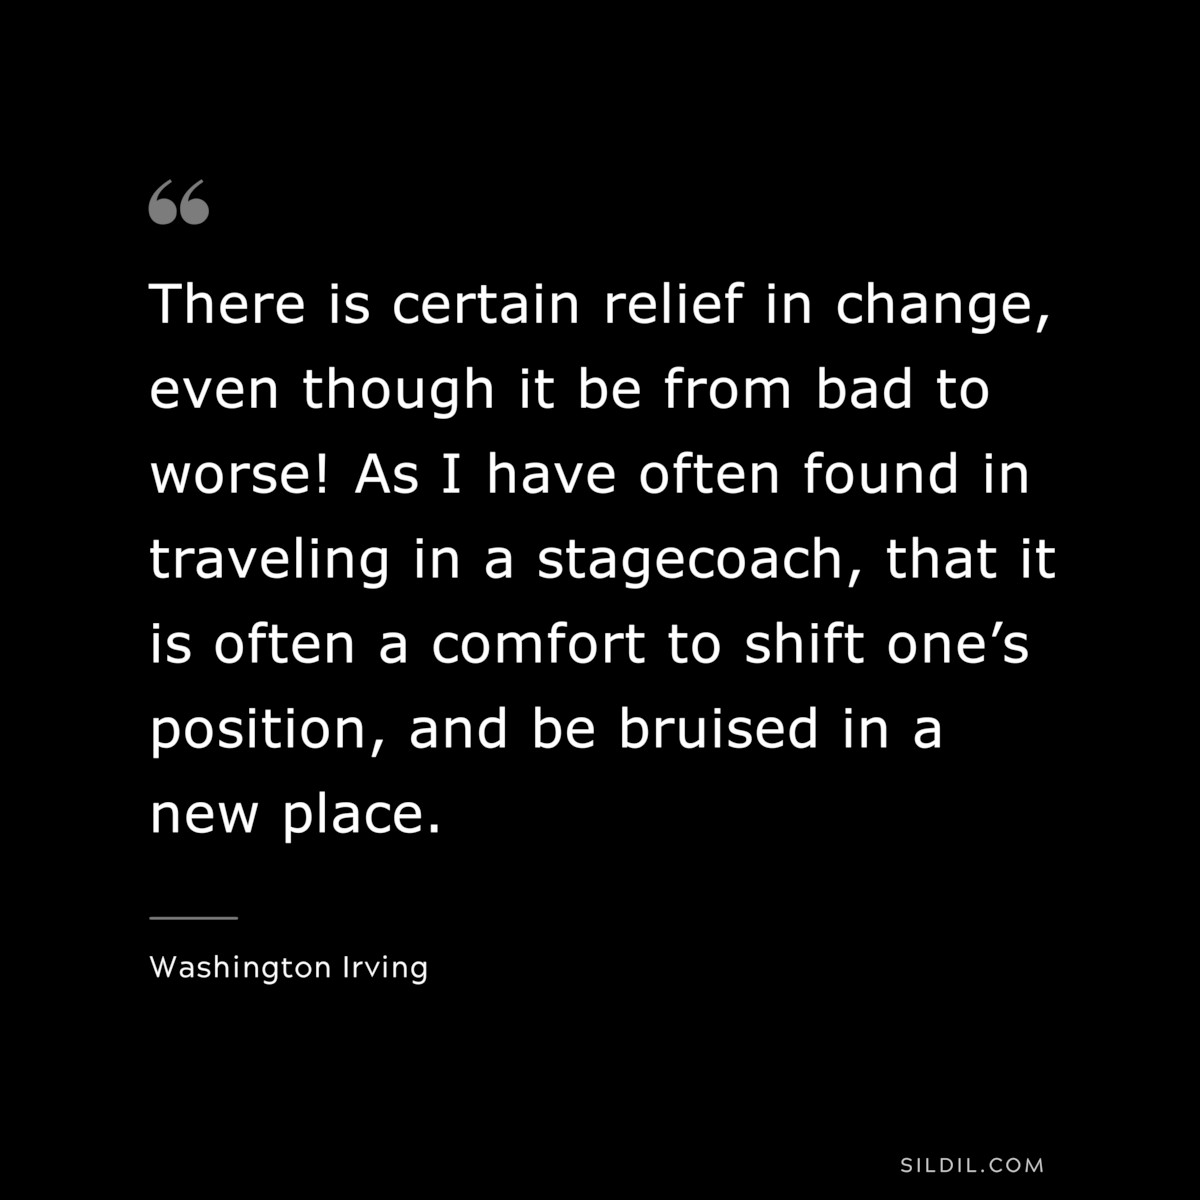 There is certain relief in change, even though it be from bad to worse! As I have often found in traveling in a stagecoach, that it is often a comfort to shift one’s position, and be bruised in a new place. ― Washington Irving